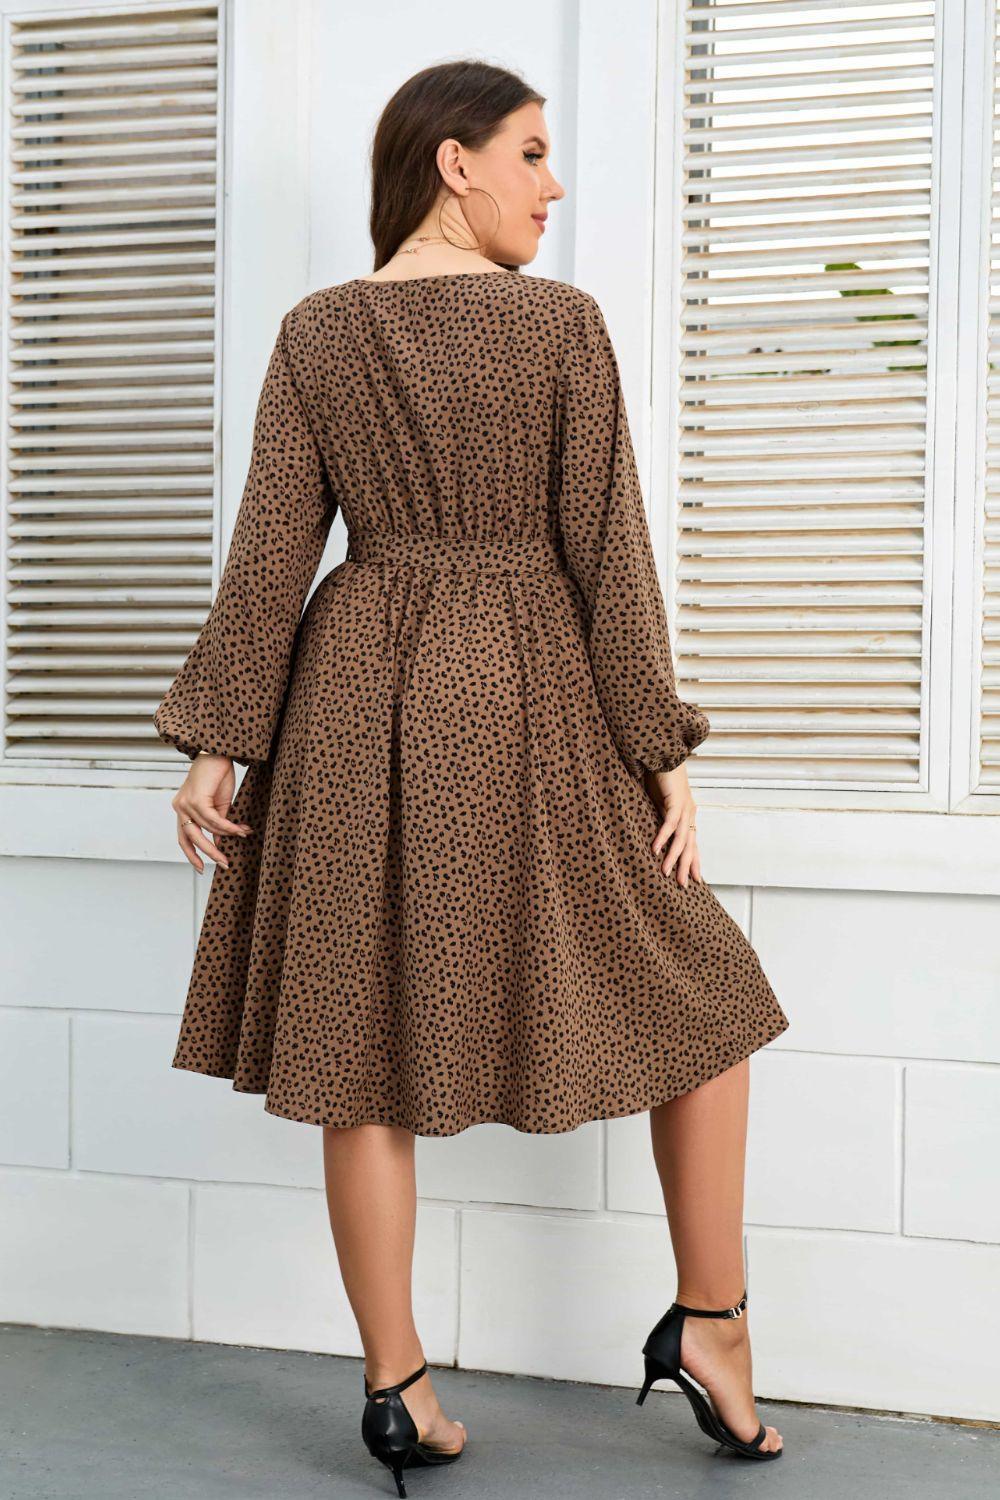 Hit The Town In Brown Plus Size Balloon Sleeve Dress - MXSTUDIO.COM